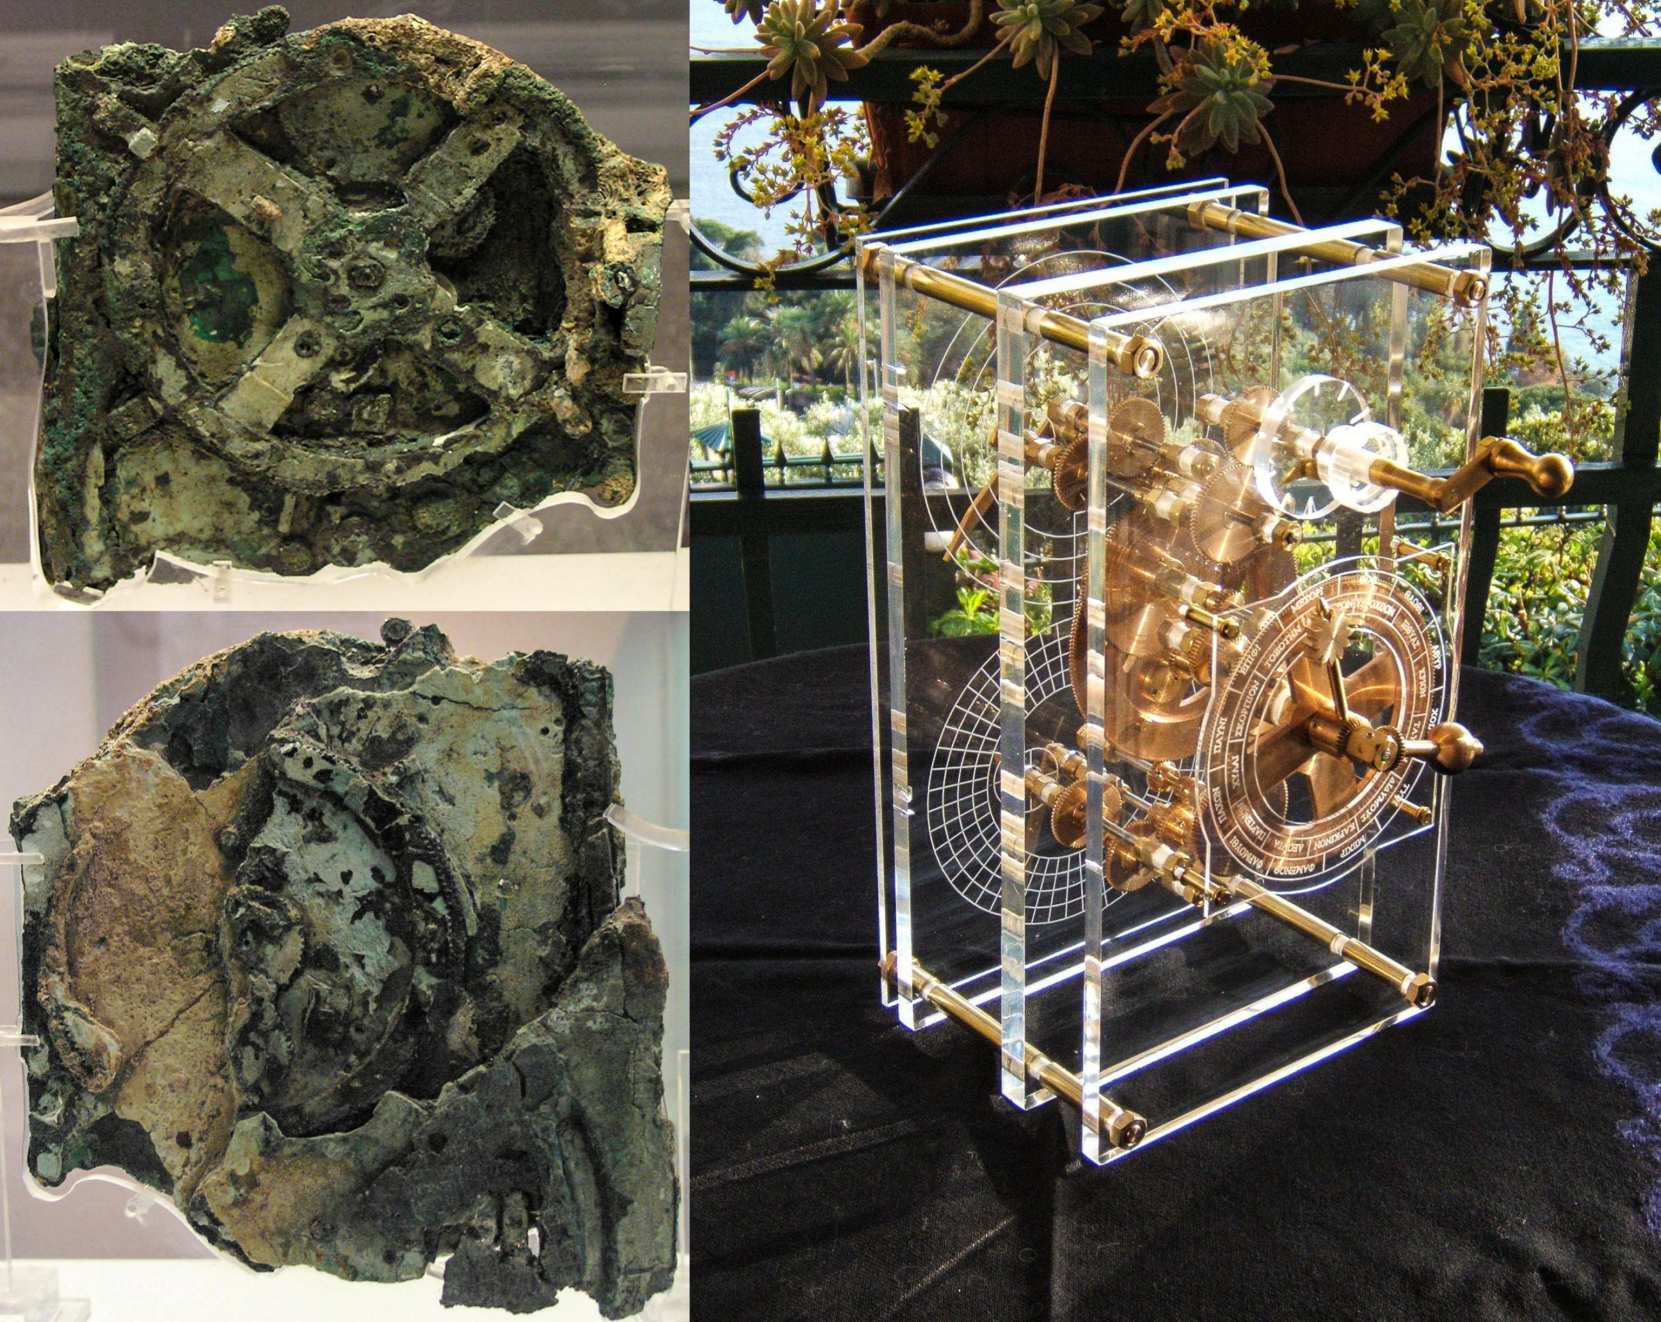 The Antikythera mechanism (reconstruction visible in the image at right) consists of 37 different types of gears and is so complex that many consider it the first analog computer made by man. Found housed in a 340 mm × 180 mm × 90 mm wooden box, the device is a complex clockwork mechanism composed of at least 30 meshing bronze gears. Its remains were found as 82 separate fragments, of which only seven contain any gears or significant inscriptions. The largest gear (clearly visible in image at top-left) is approximately 140 mm in diameter and originally had 223 teeth.